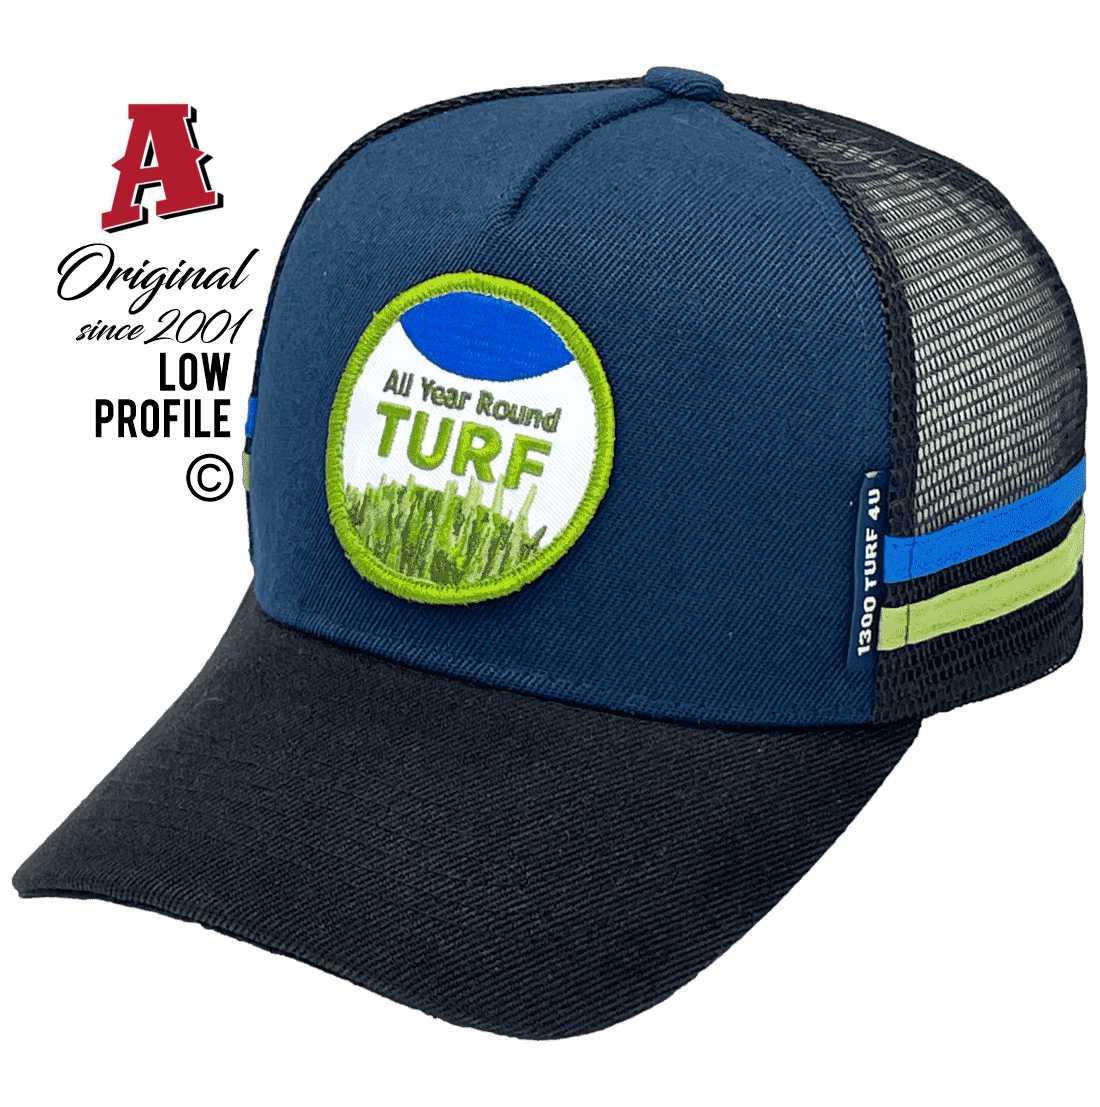 All Year Round Turf Wilberforce NSW Basic Aussie Trucker Hats, Low Profile with Sewn-on Round Embroidered Badge